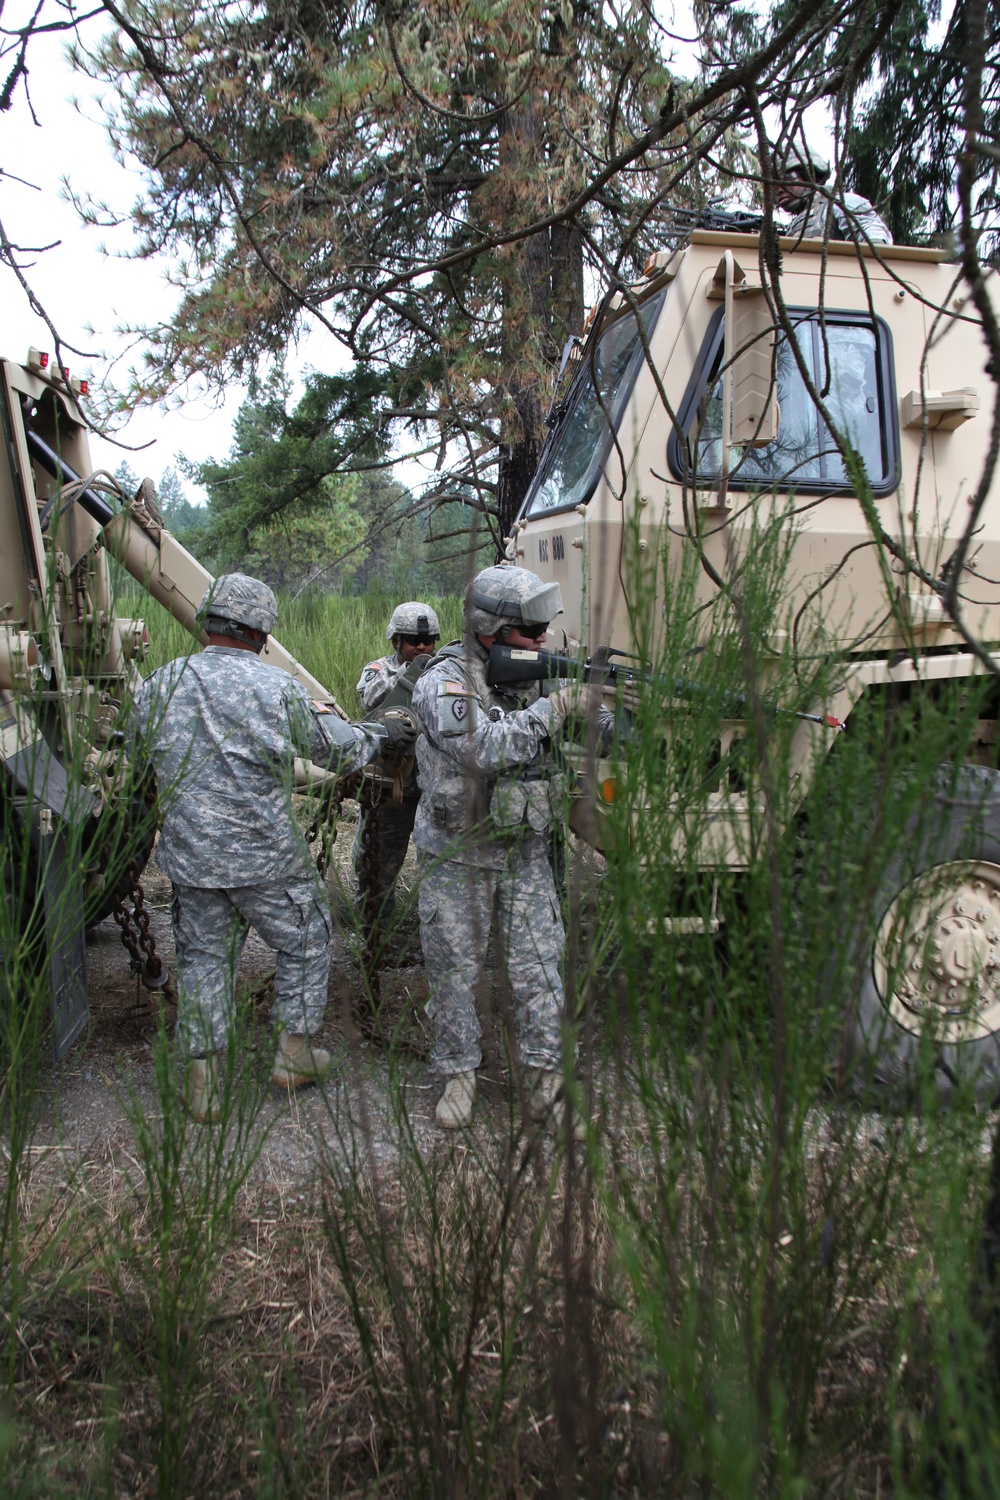 46th ASB maintains its capabilities